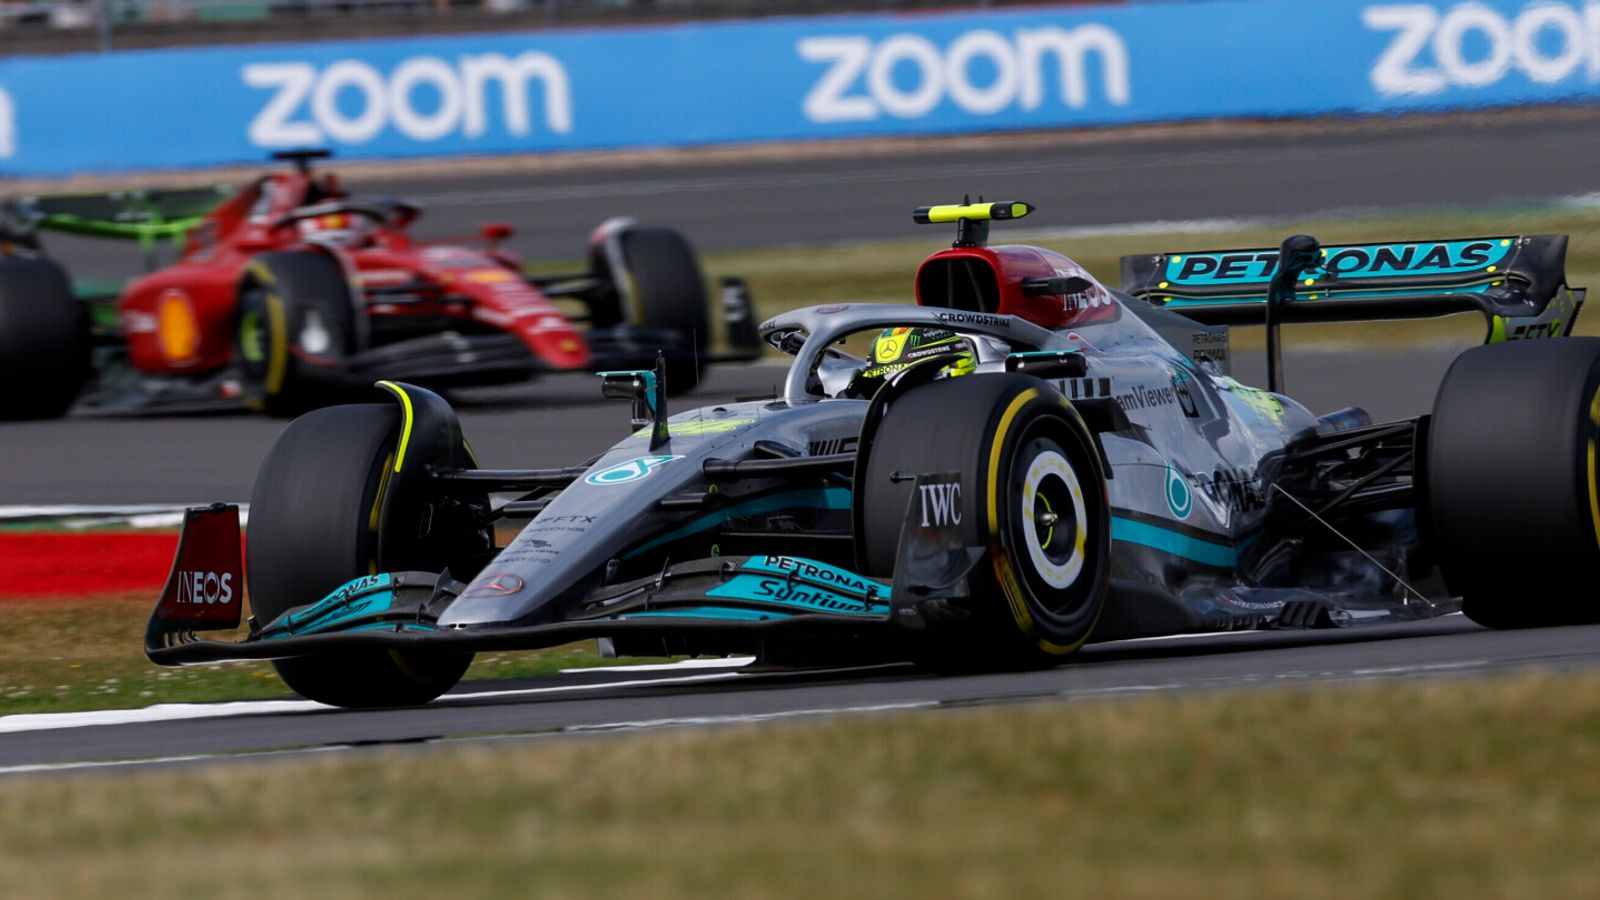 British GP: Live updates from Qualifying and Practice Three as Lewis Hamilton looks to maintain pace